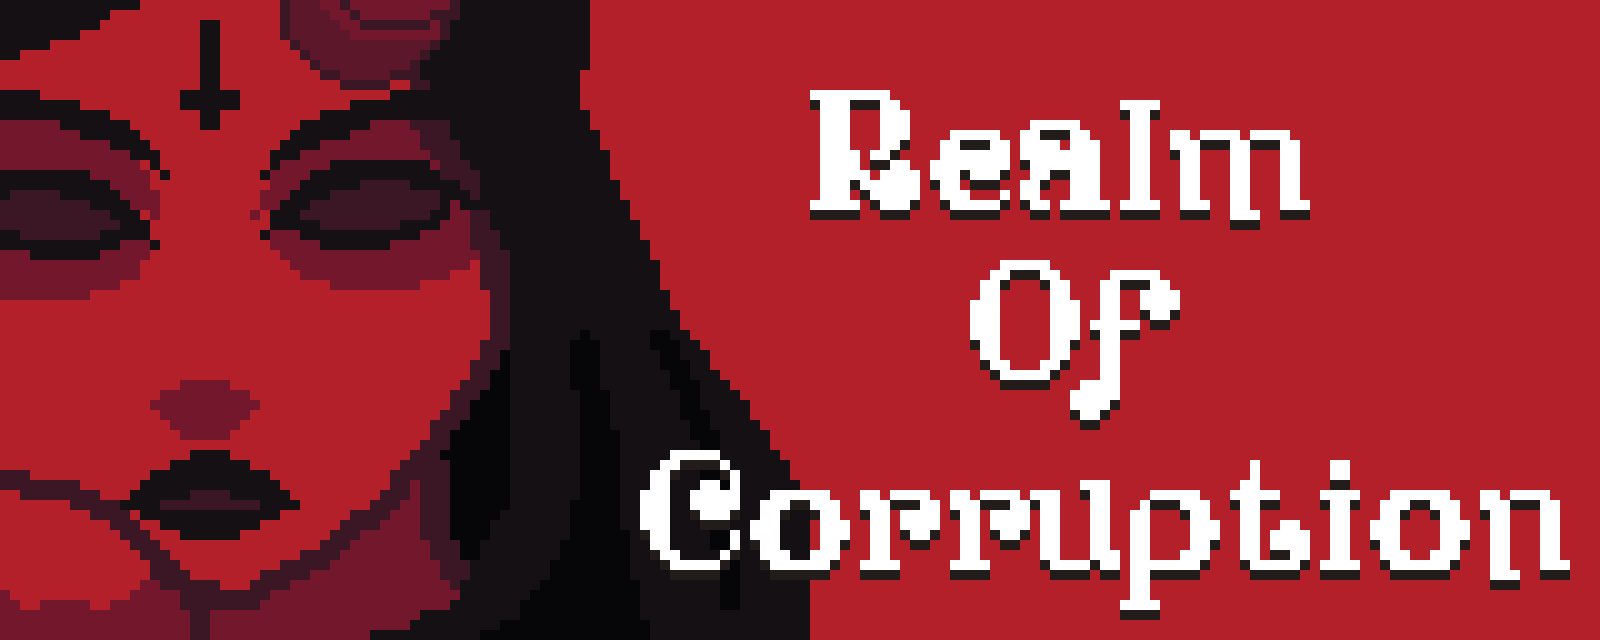 Realm of corruption porn game